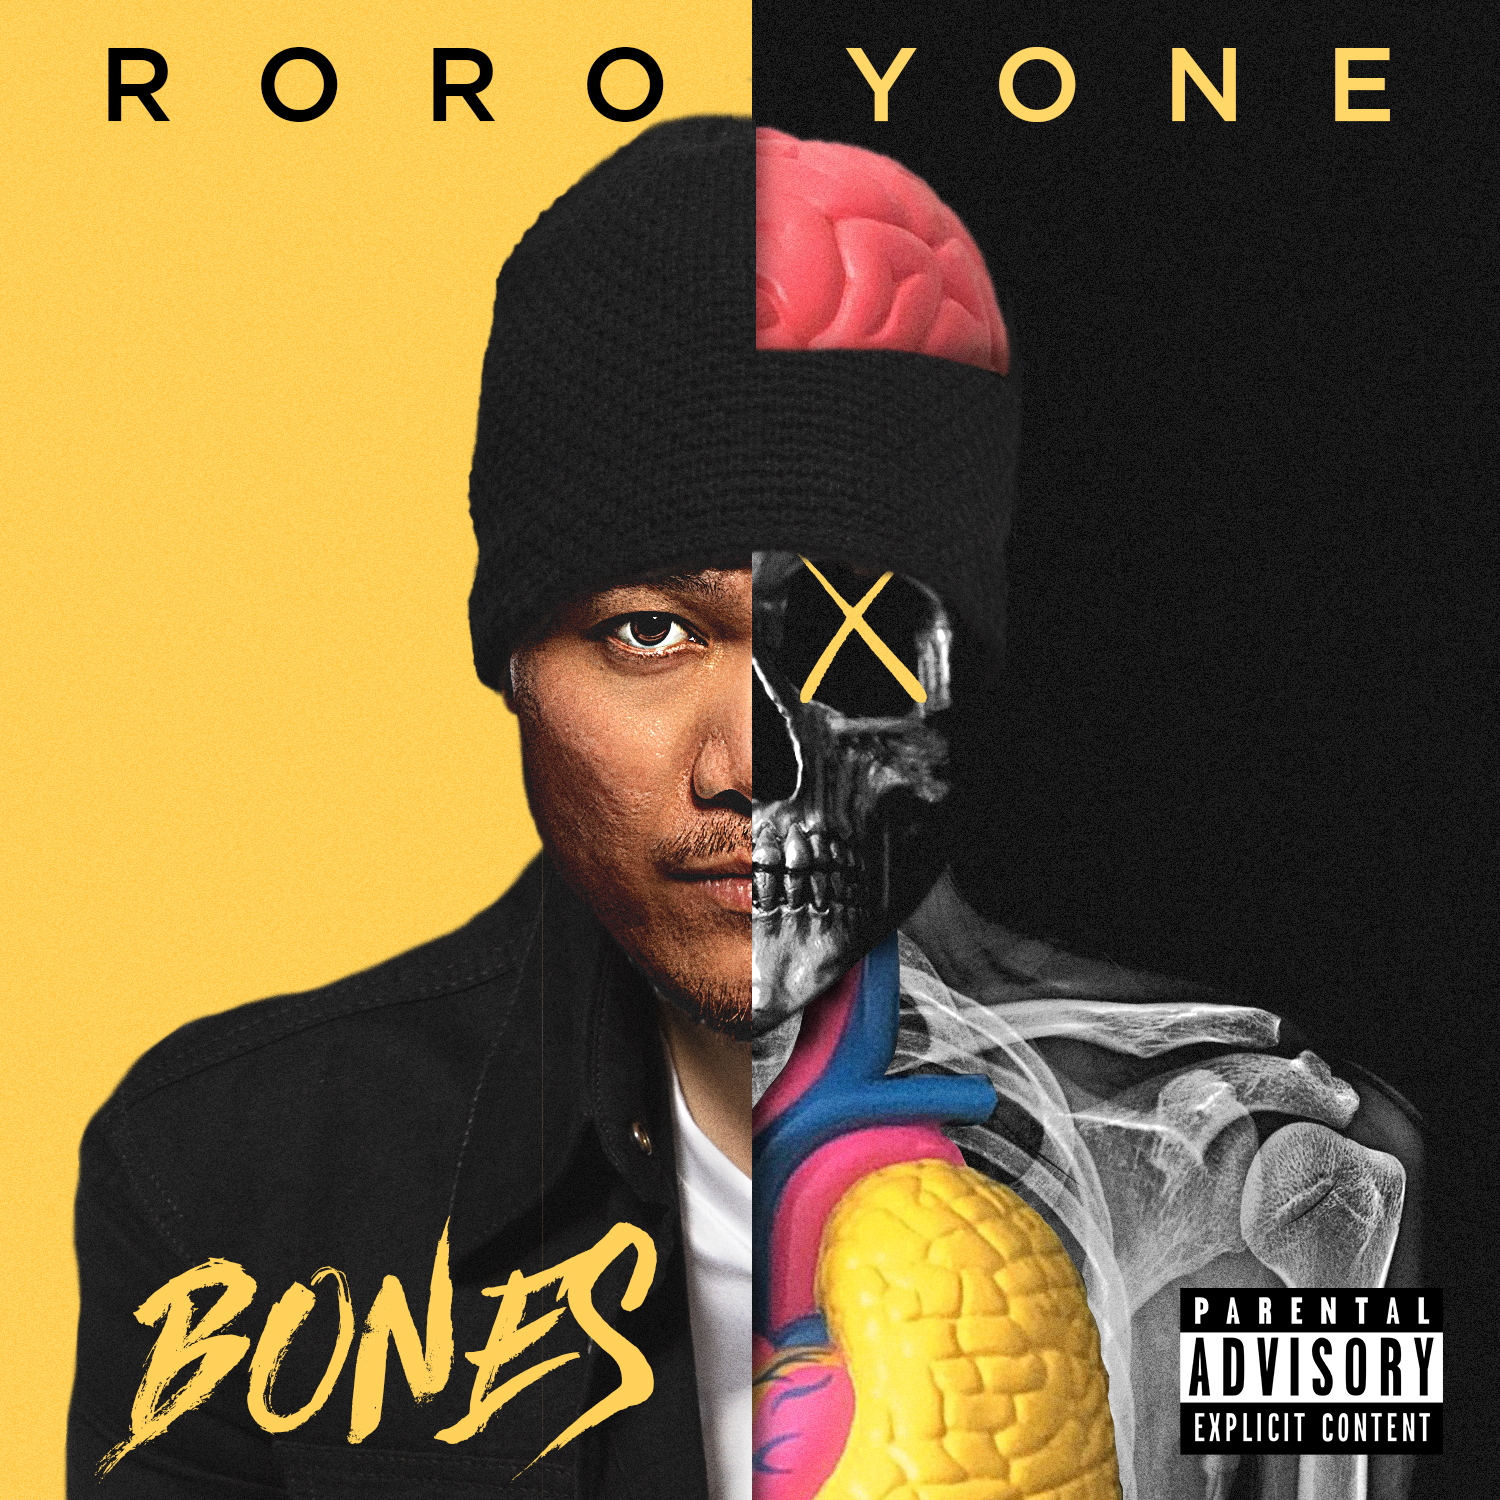 Filipino Melodic-Rapper RoRo Yone Shares Insights About His Latest Hit ‘Bones EP’